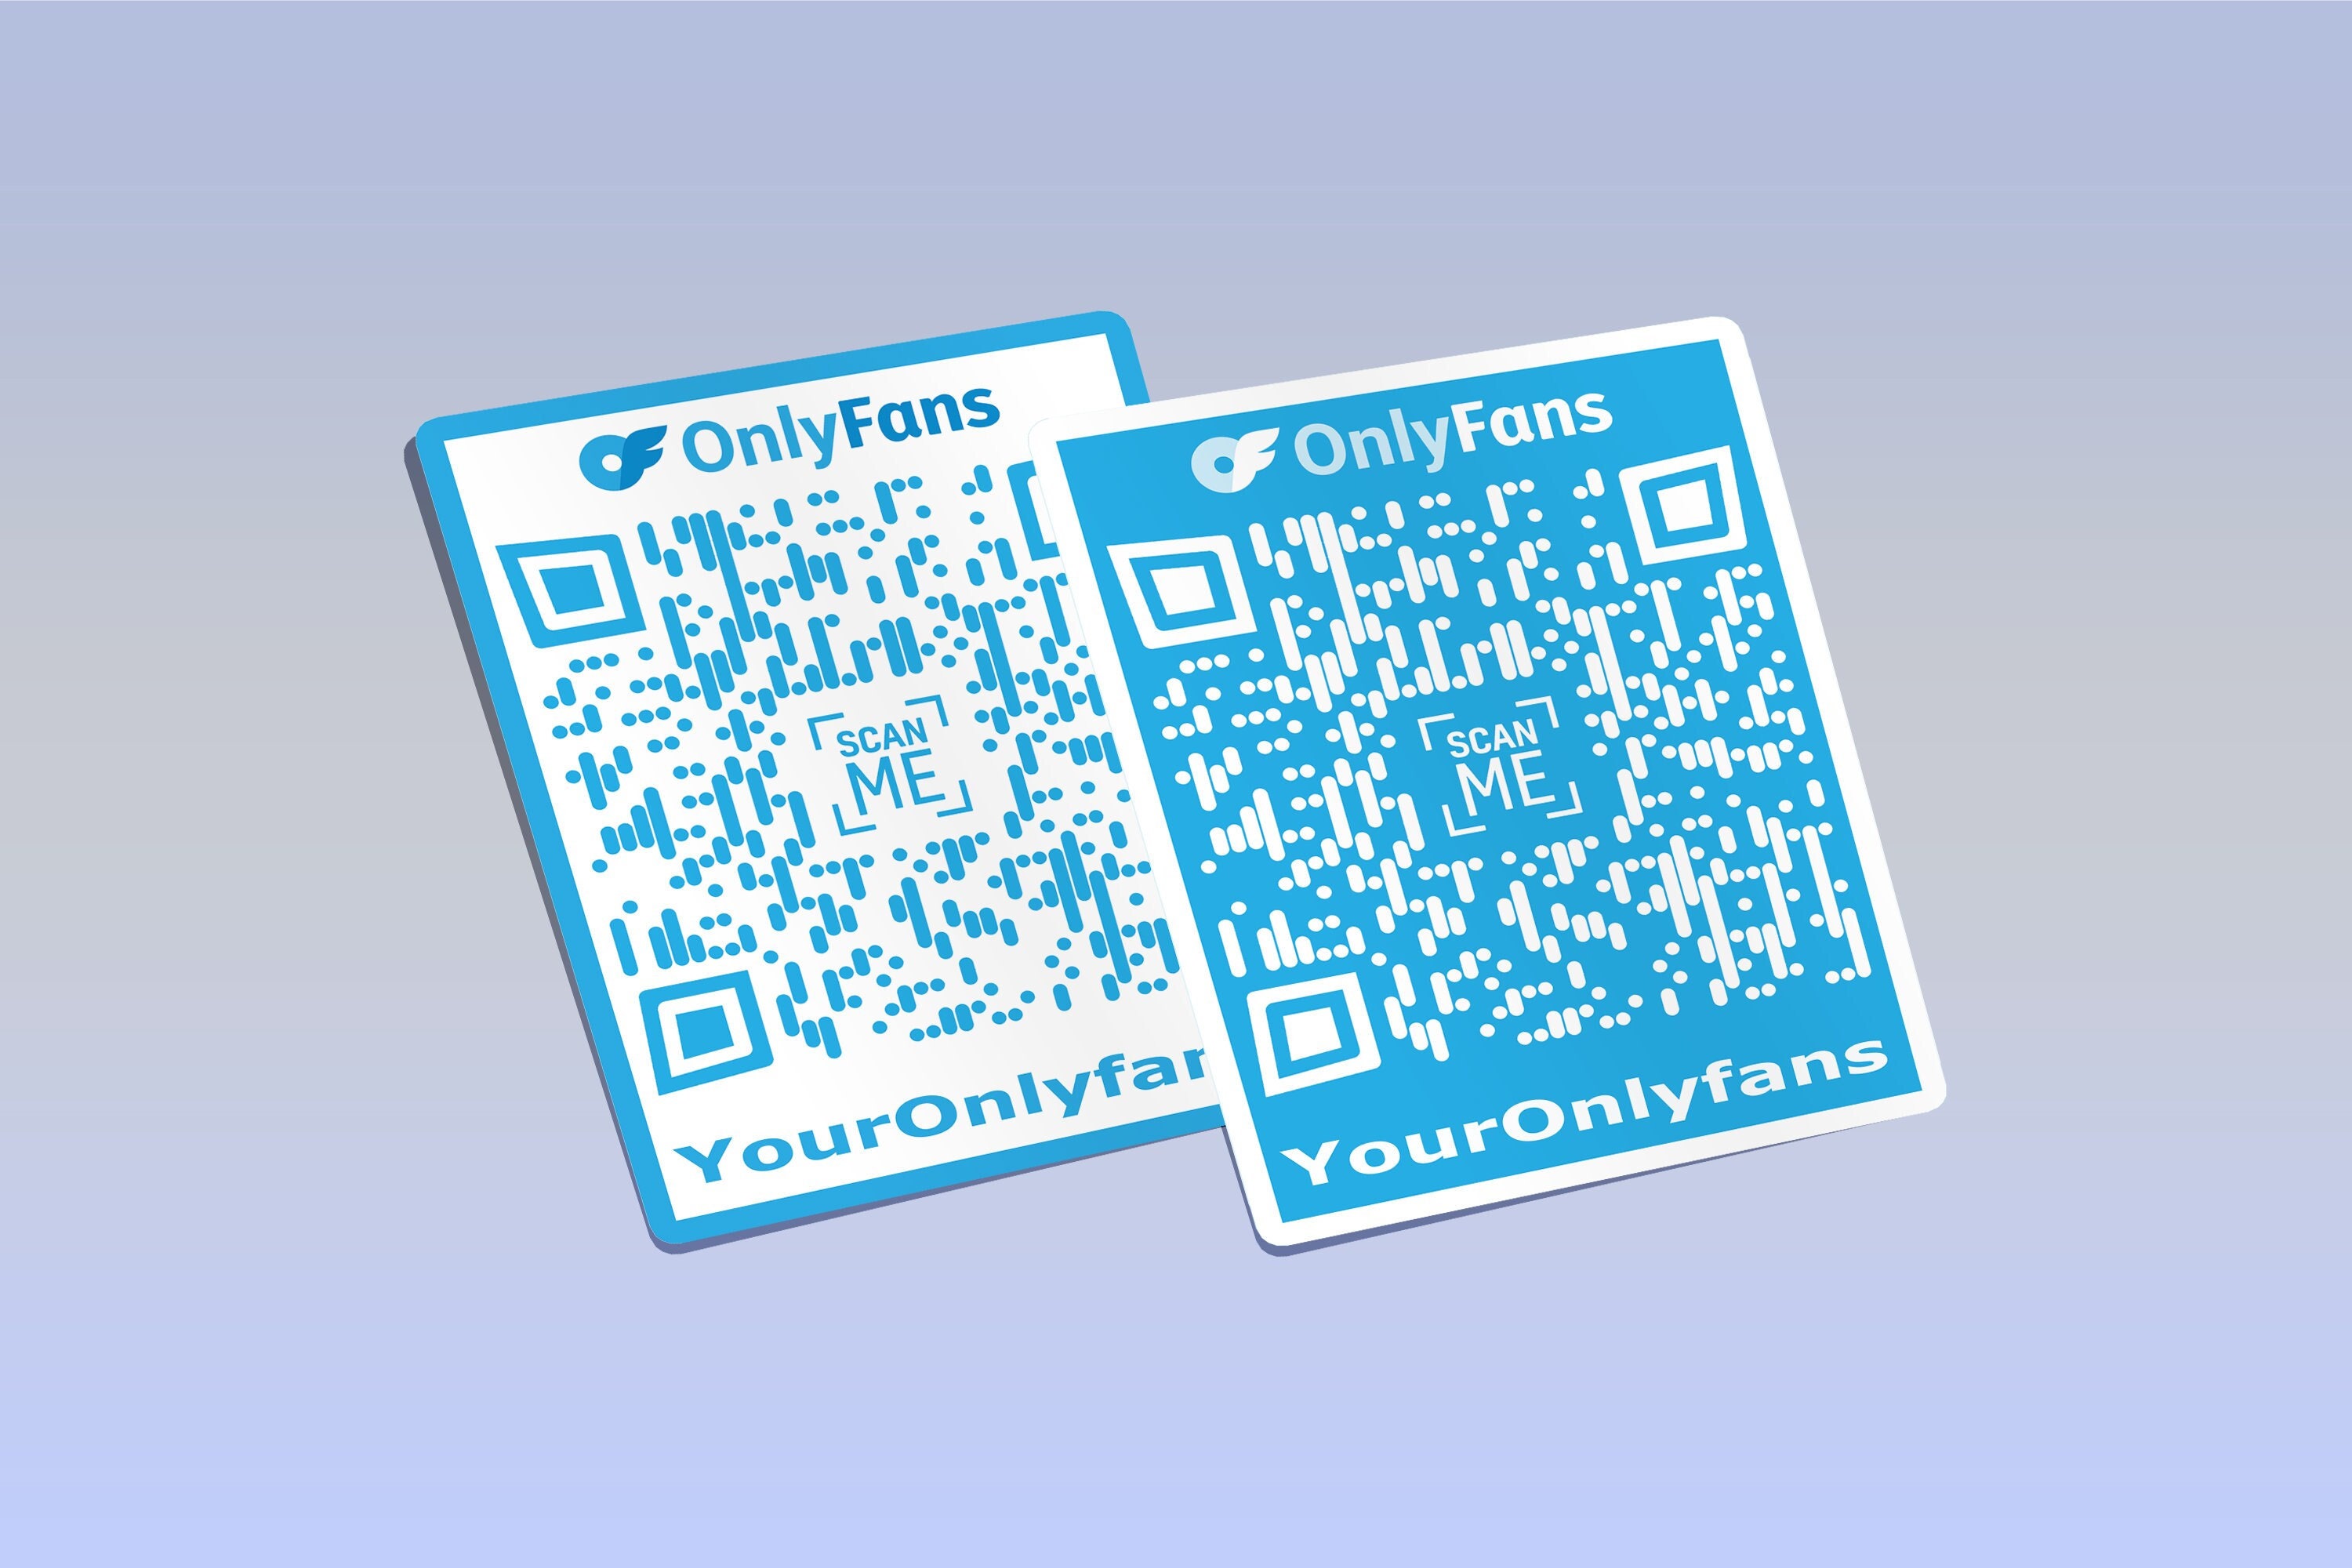 Rick Roll QR Code - Check Out My Onlyfans